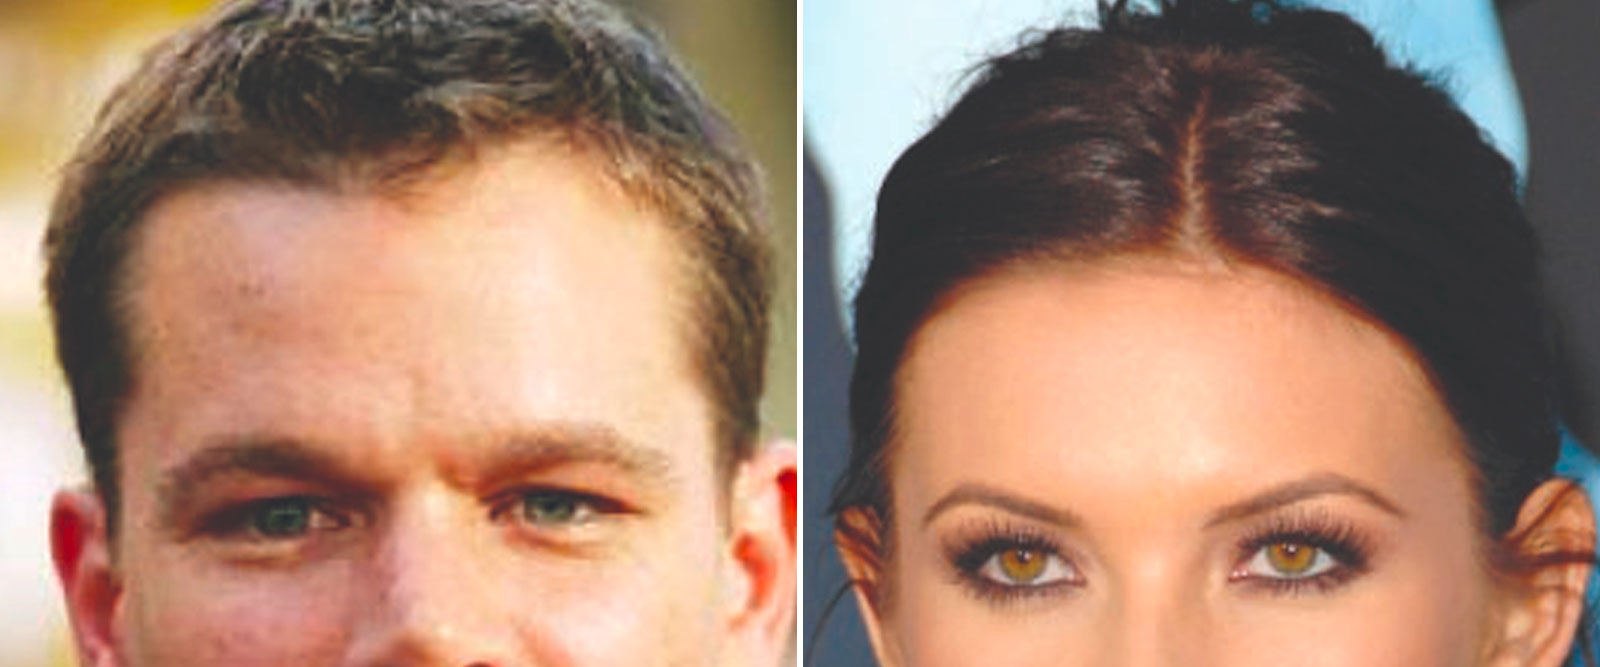 Female hairline vs male hairline: 4 main differences - 2pass Clinic